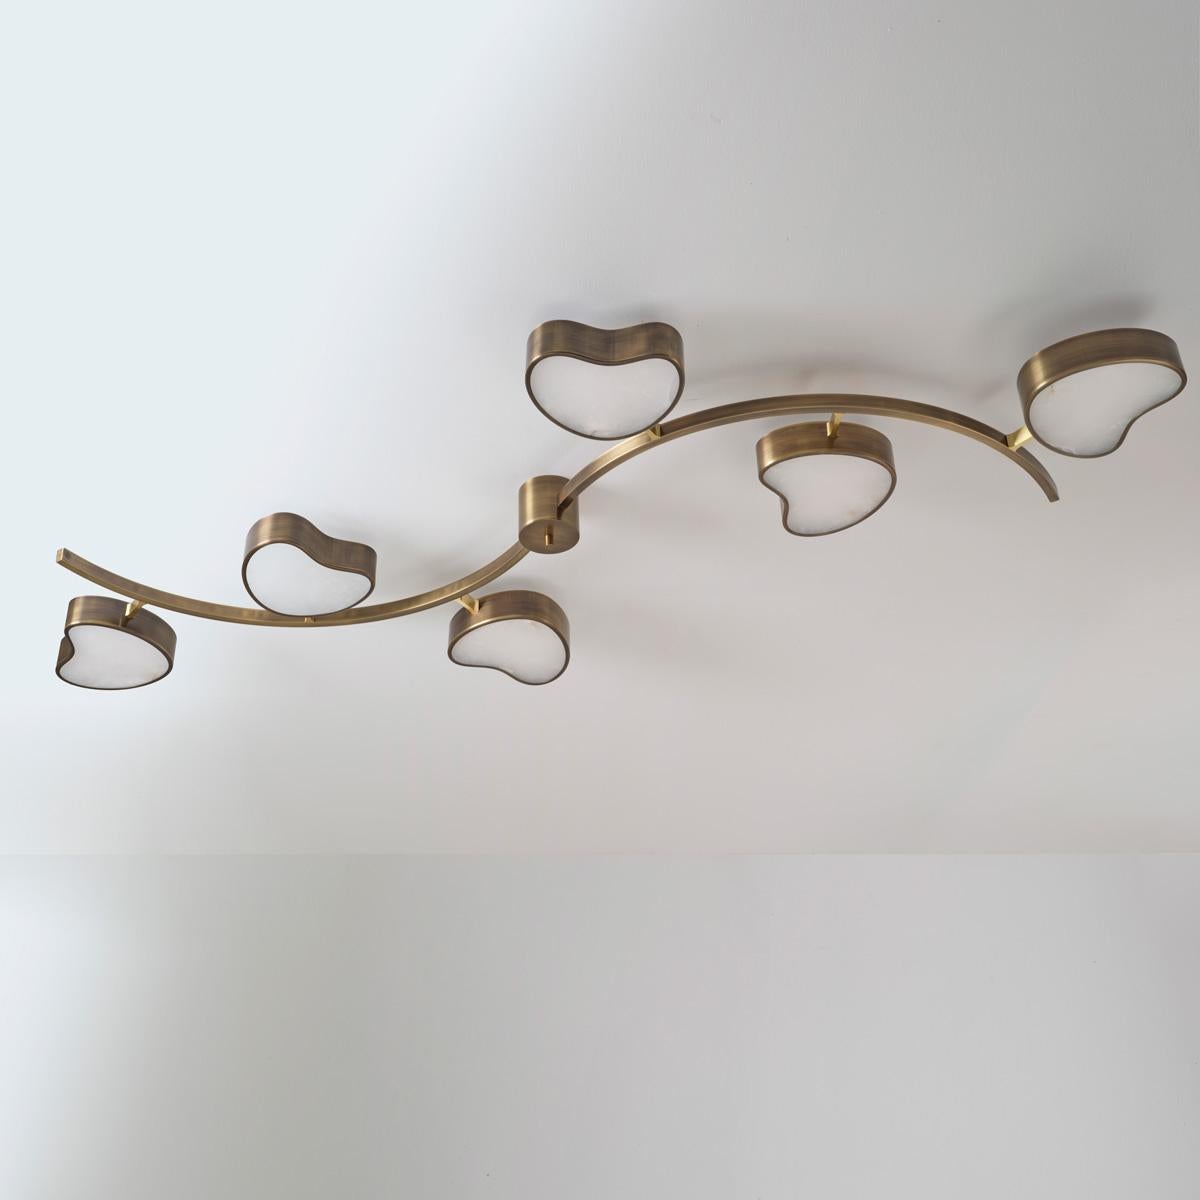 Cuore N.6 Ceiling Light by Gaspare Asaro. Polished Brass Finish For Sale 1